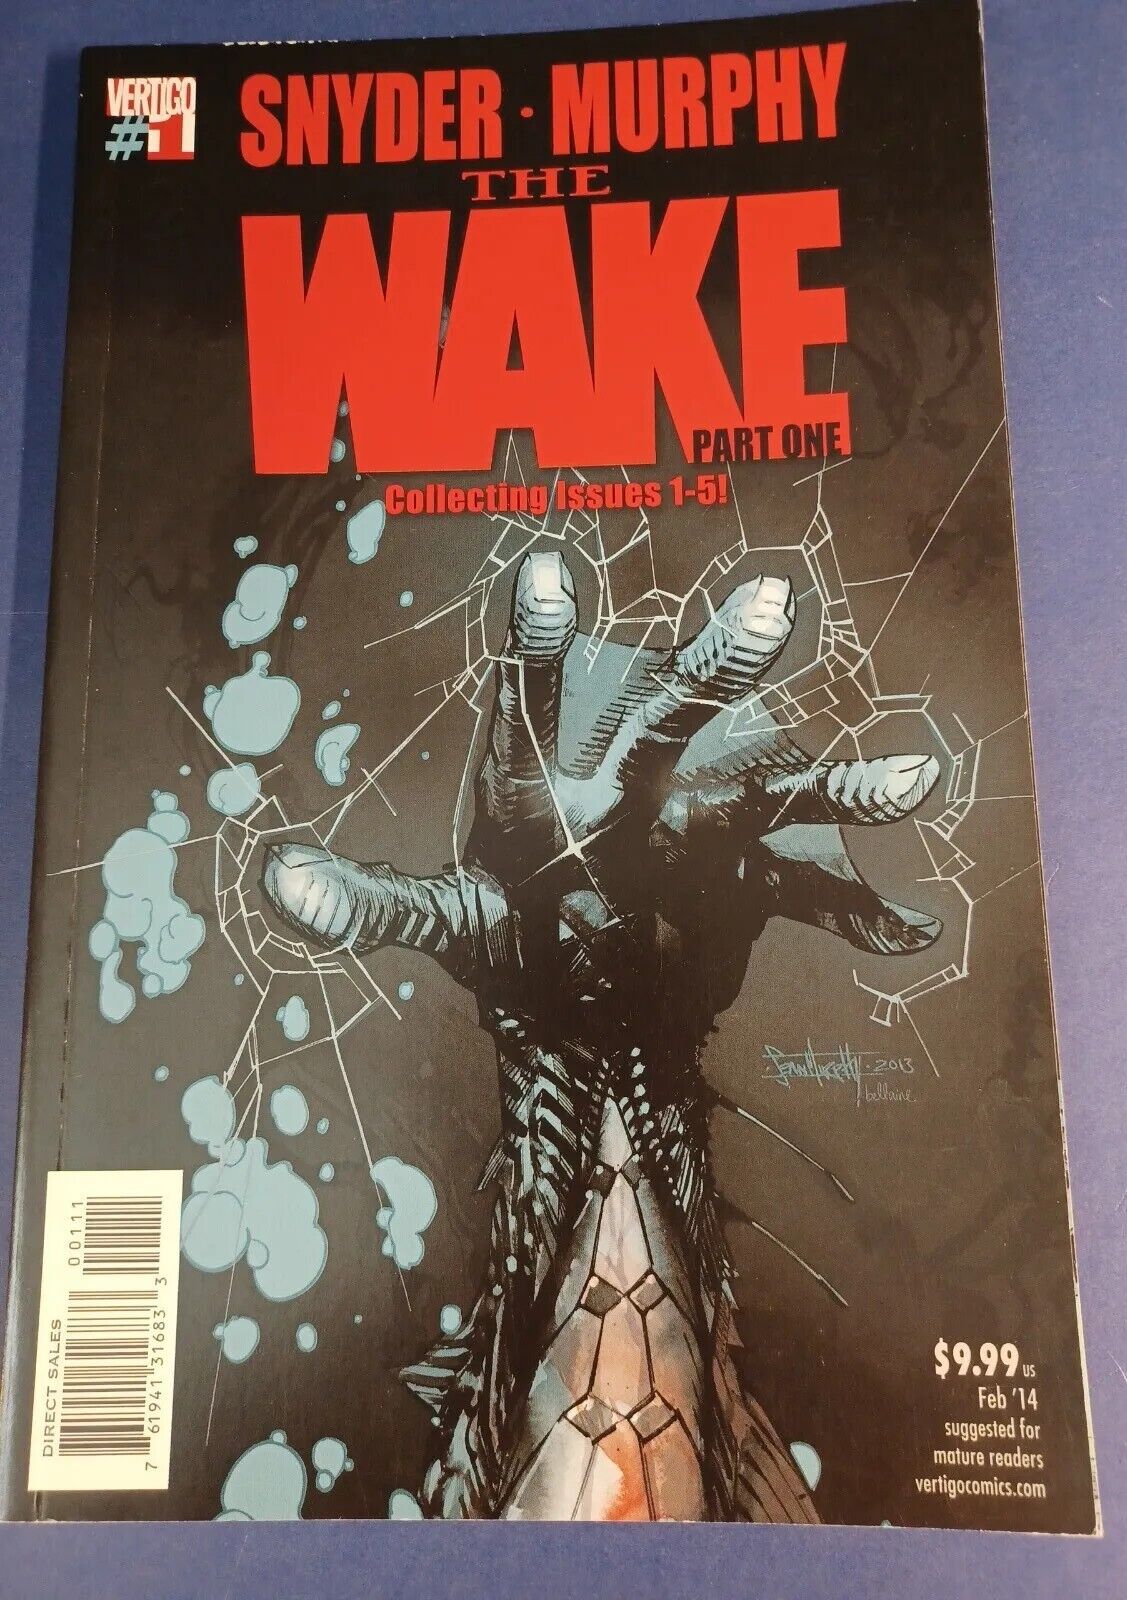 The Wake Part 1 Snyder Murphy Graphic Novel Trade Paperback 2014